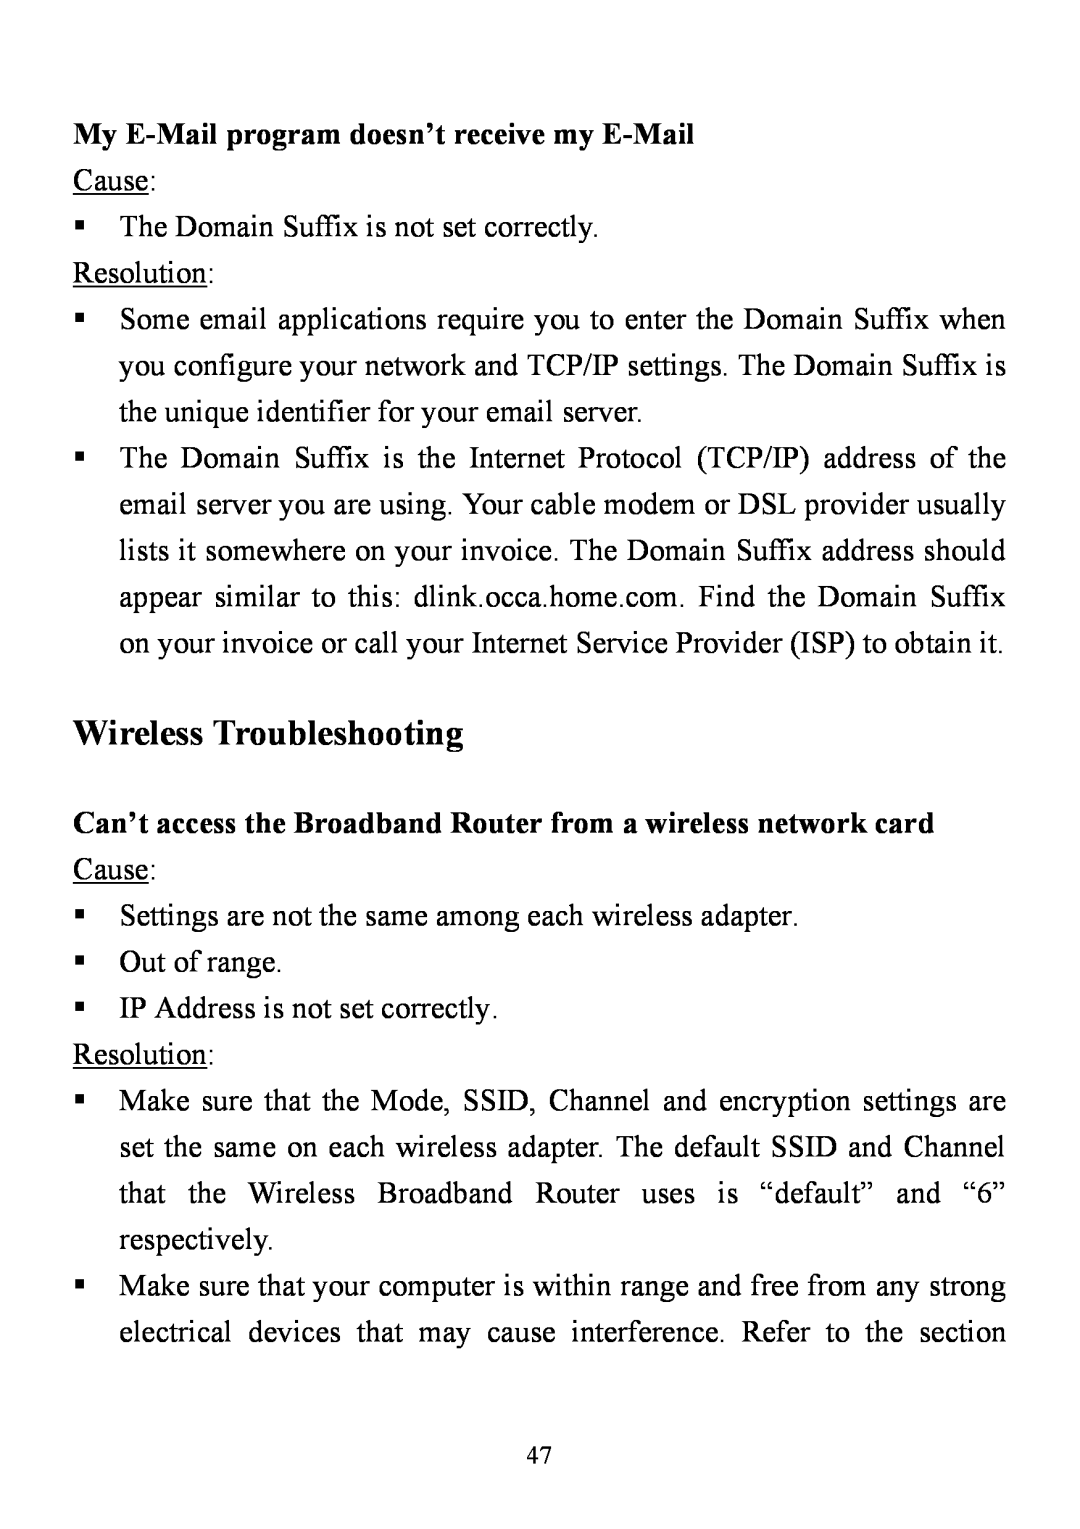 D-Link DI-714 user manual Wireless Troubleshooting, My E-Mail program doesn’t receive my E-Mail 